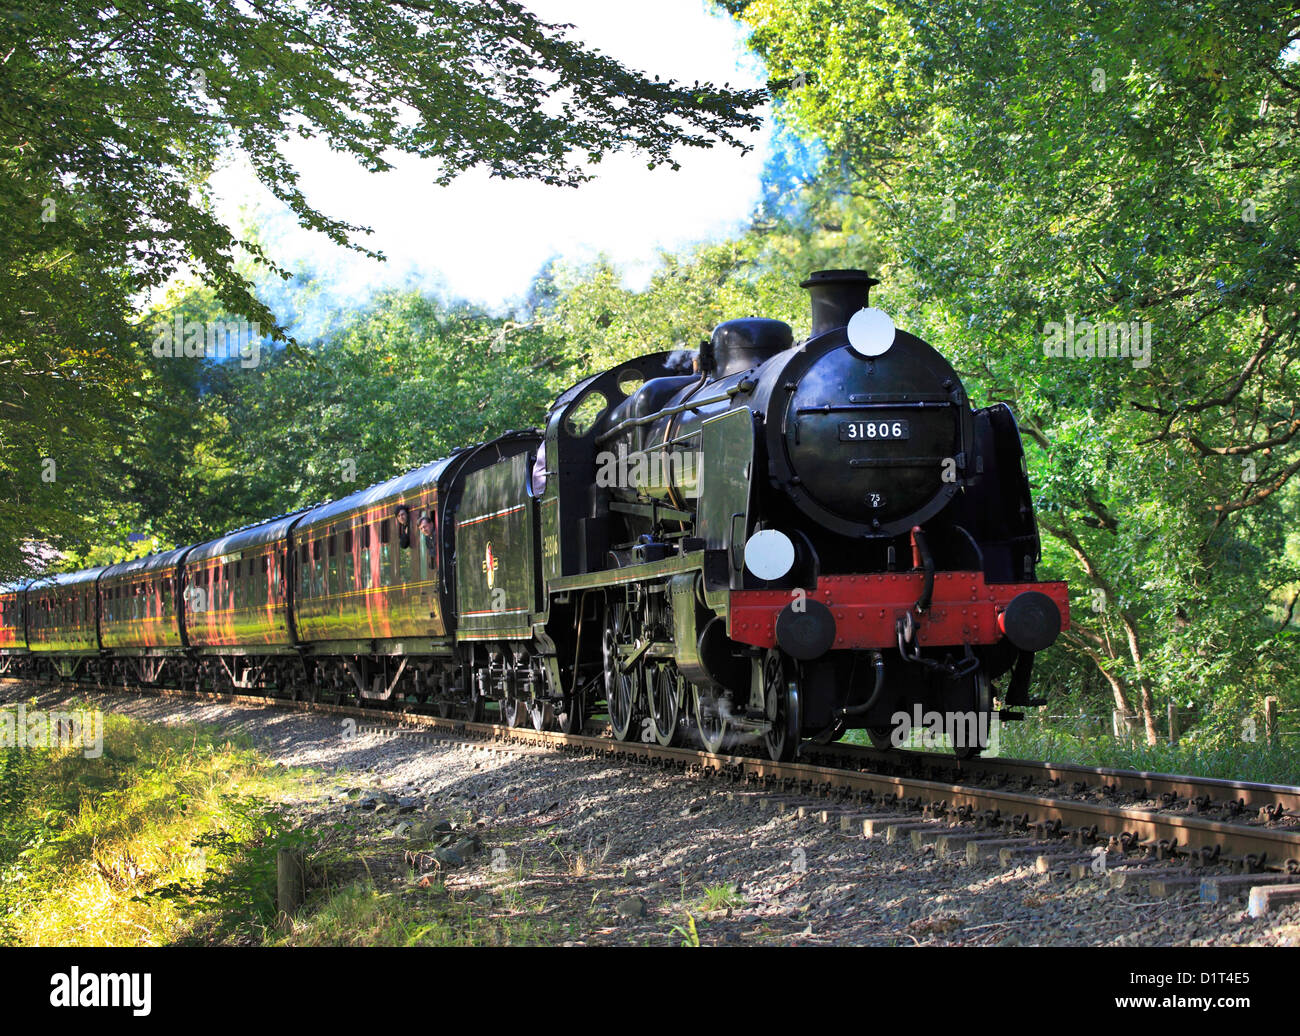 Southern Railway maunsell 'U' class 2-6-0 N° 31806 Trimpley traverse Crossing sur la Severn Valley Railway Banque D'Images